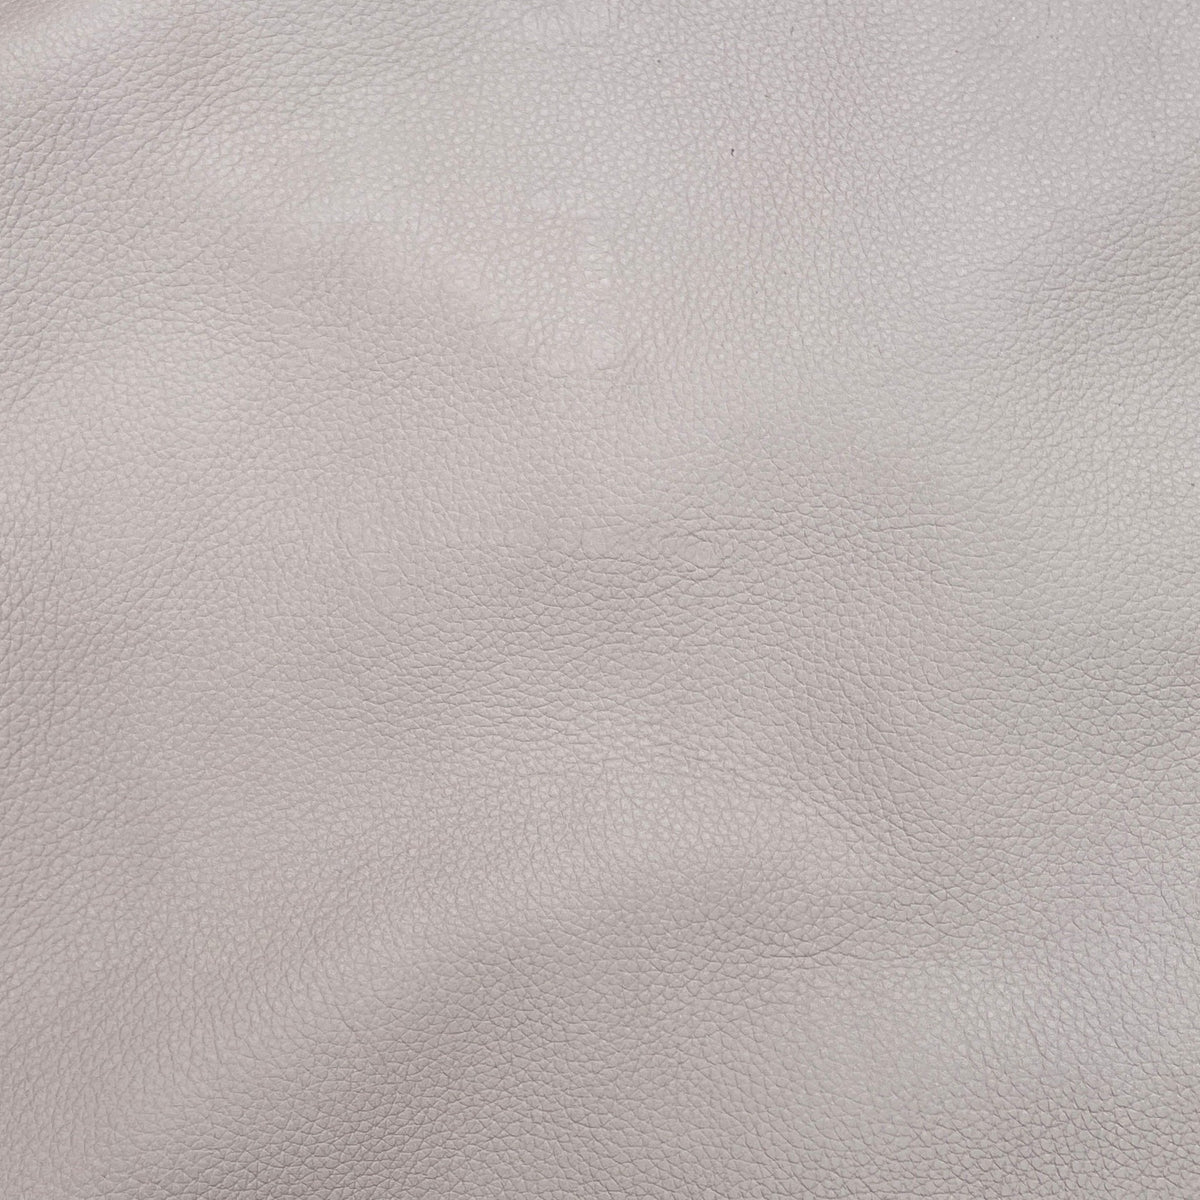 Upholstery Cow Hide #20 | Linen | 1.0/1.2mm | 50 sq.ft | From $420 ea.